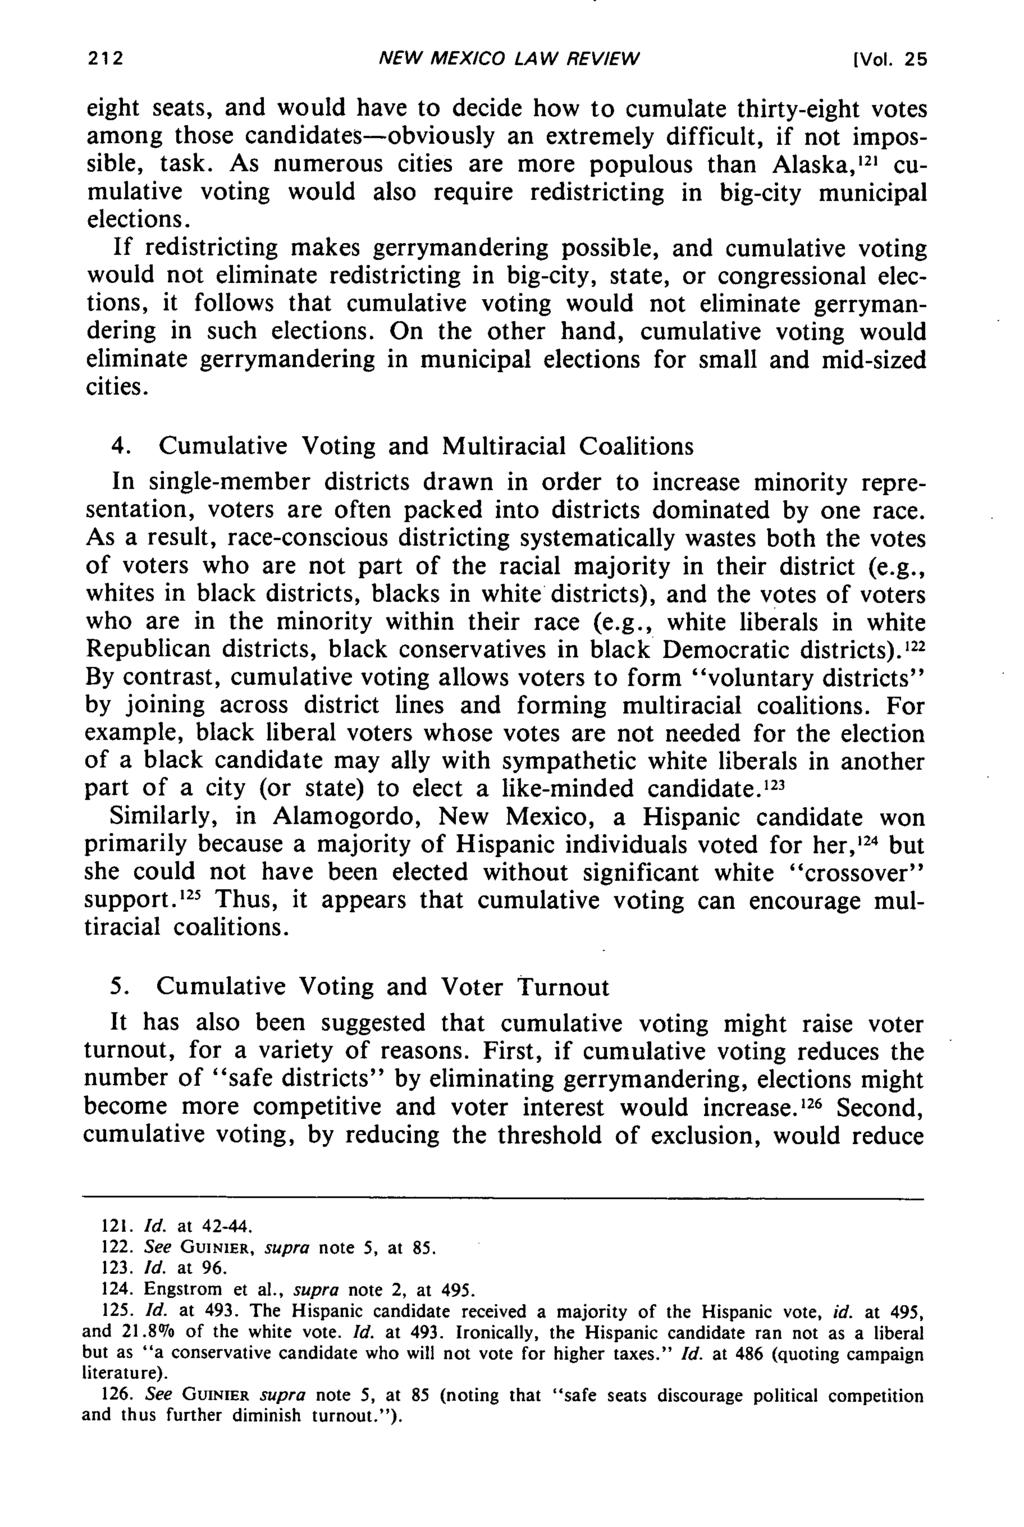 NEW MEXICO LAW REVIEW [Vol. 25 eight seats, and would have to decide how to cumulate thirty-eight votes among those candidates-obviously an extremely difficult, if not impossible, task.